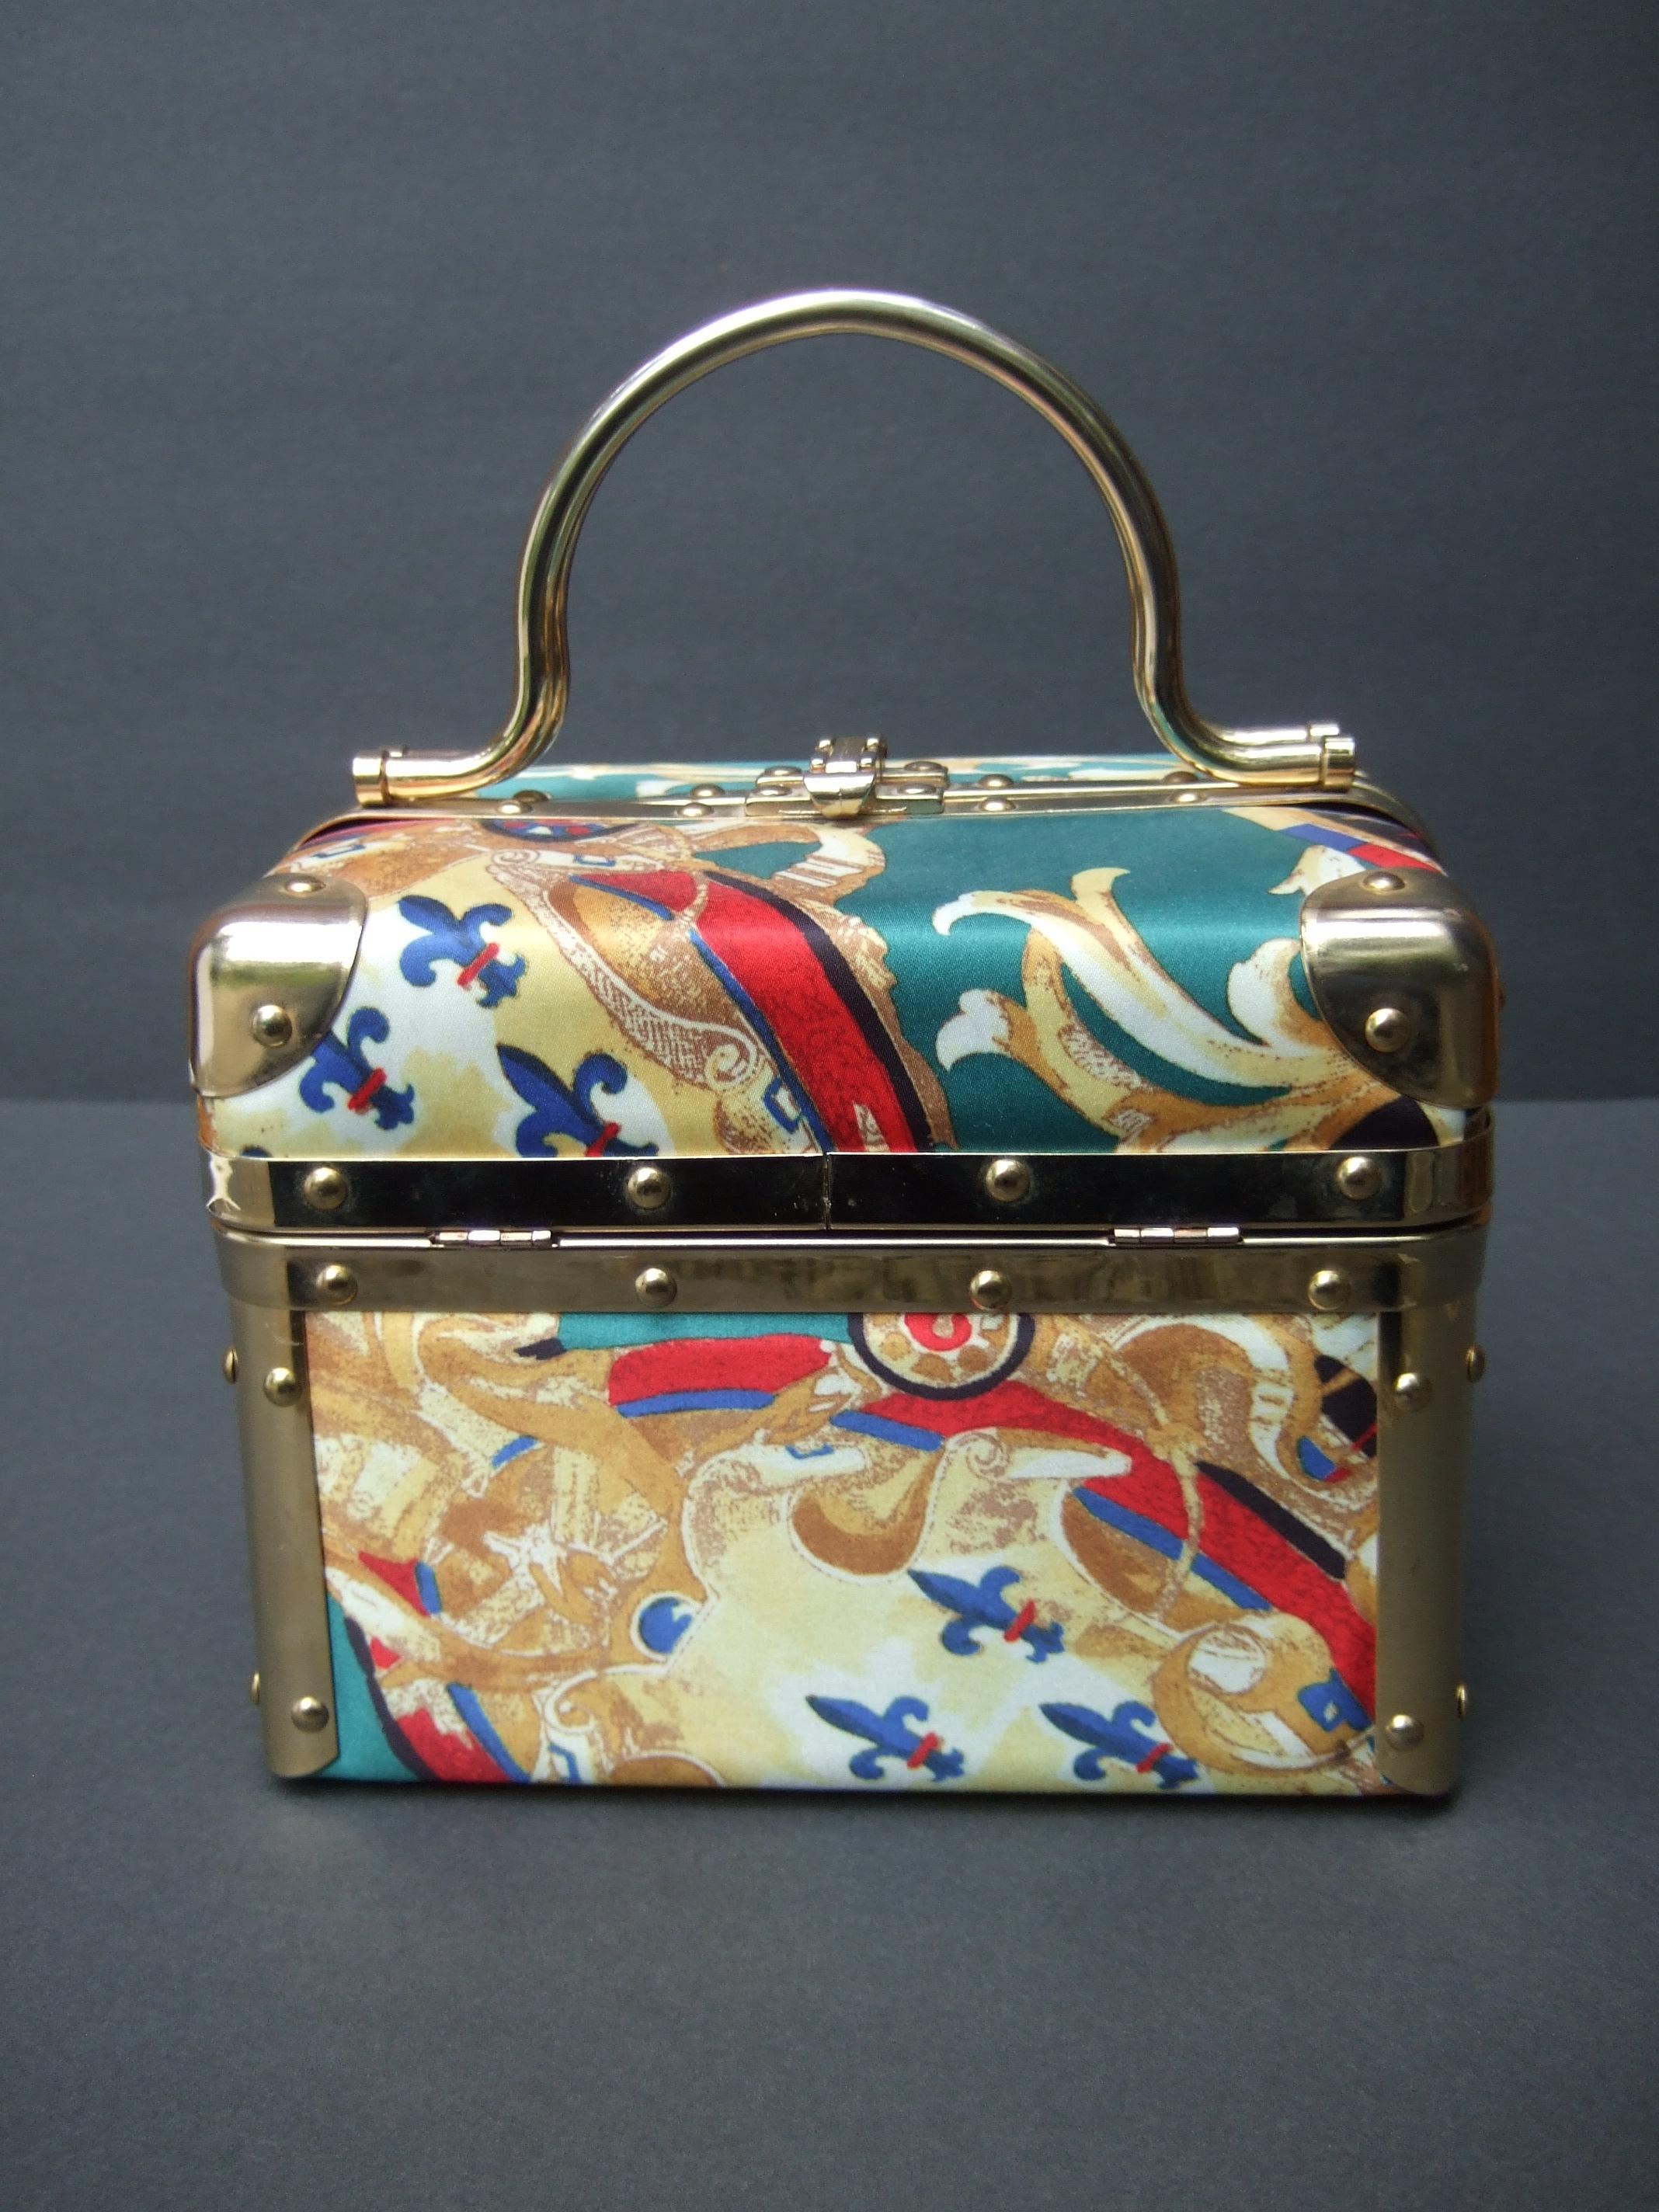 Borsa Bella Rare Italian satin acetate print box purse c 1980
The stylish Italian box purse is covered with vibrant graphics 
with golden scrolled rococo designs; illuminated against 
an emerald green background 

Framed with gold plated metal